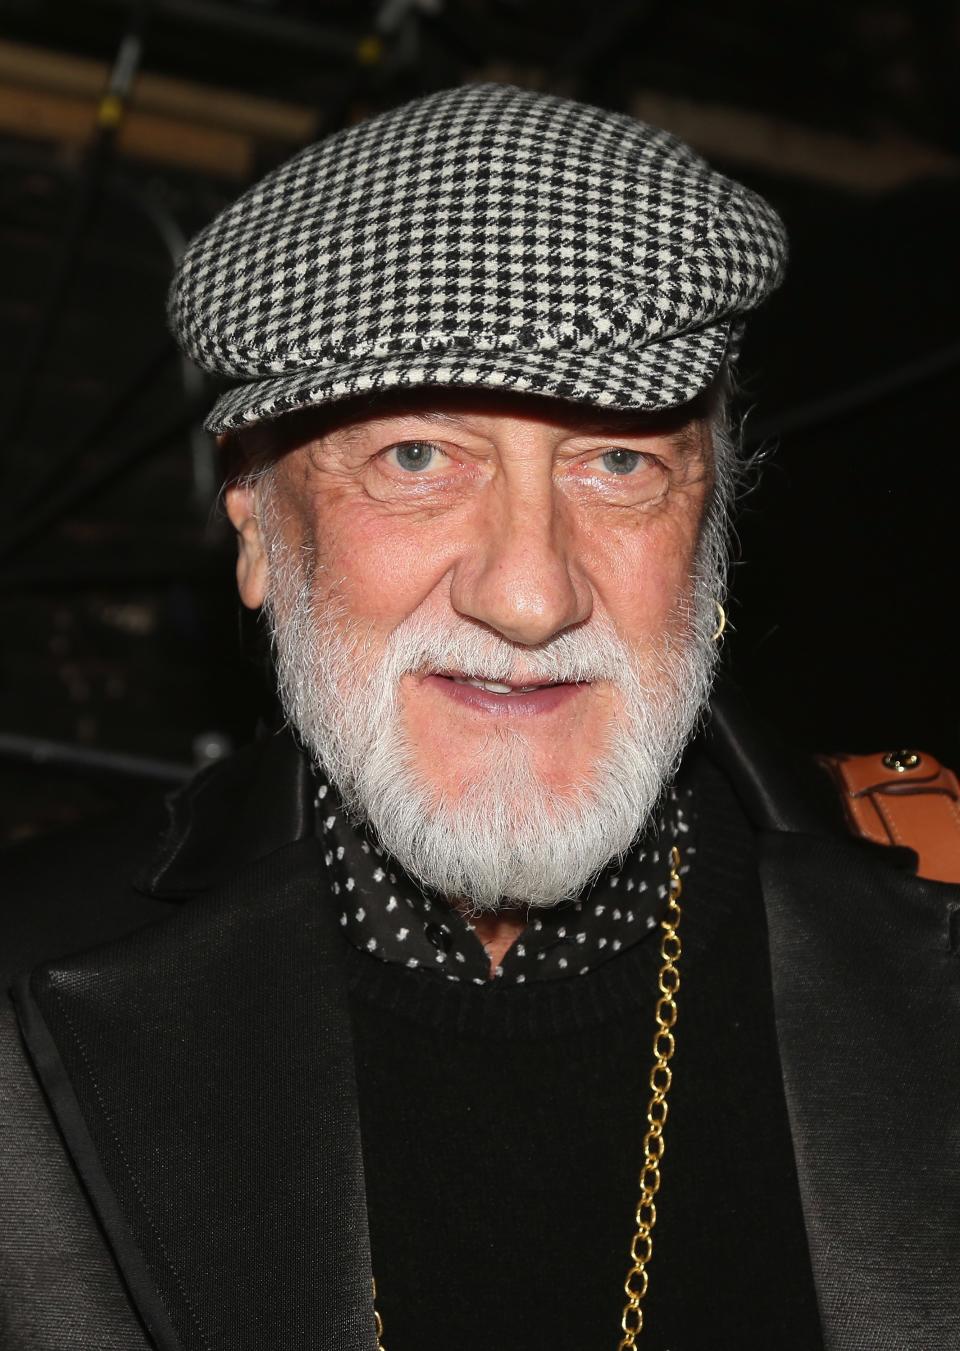 Mick Fleetwood Is a Master of Disguise